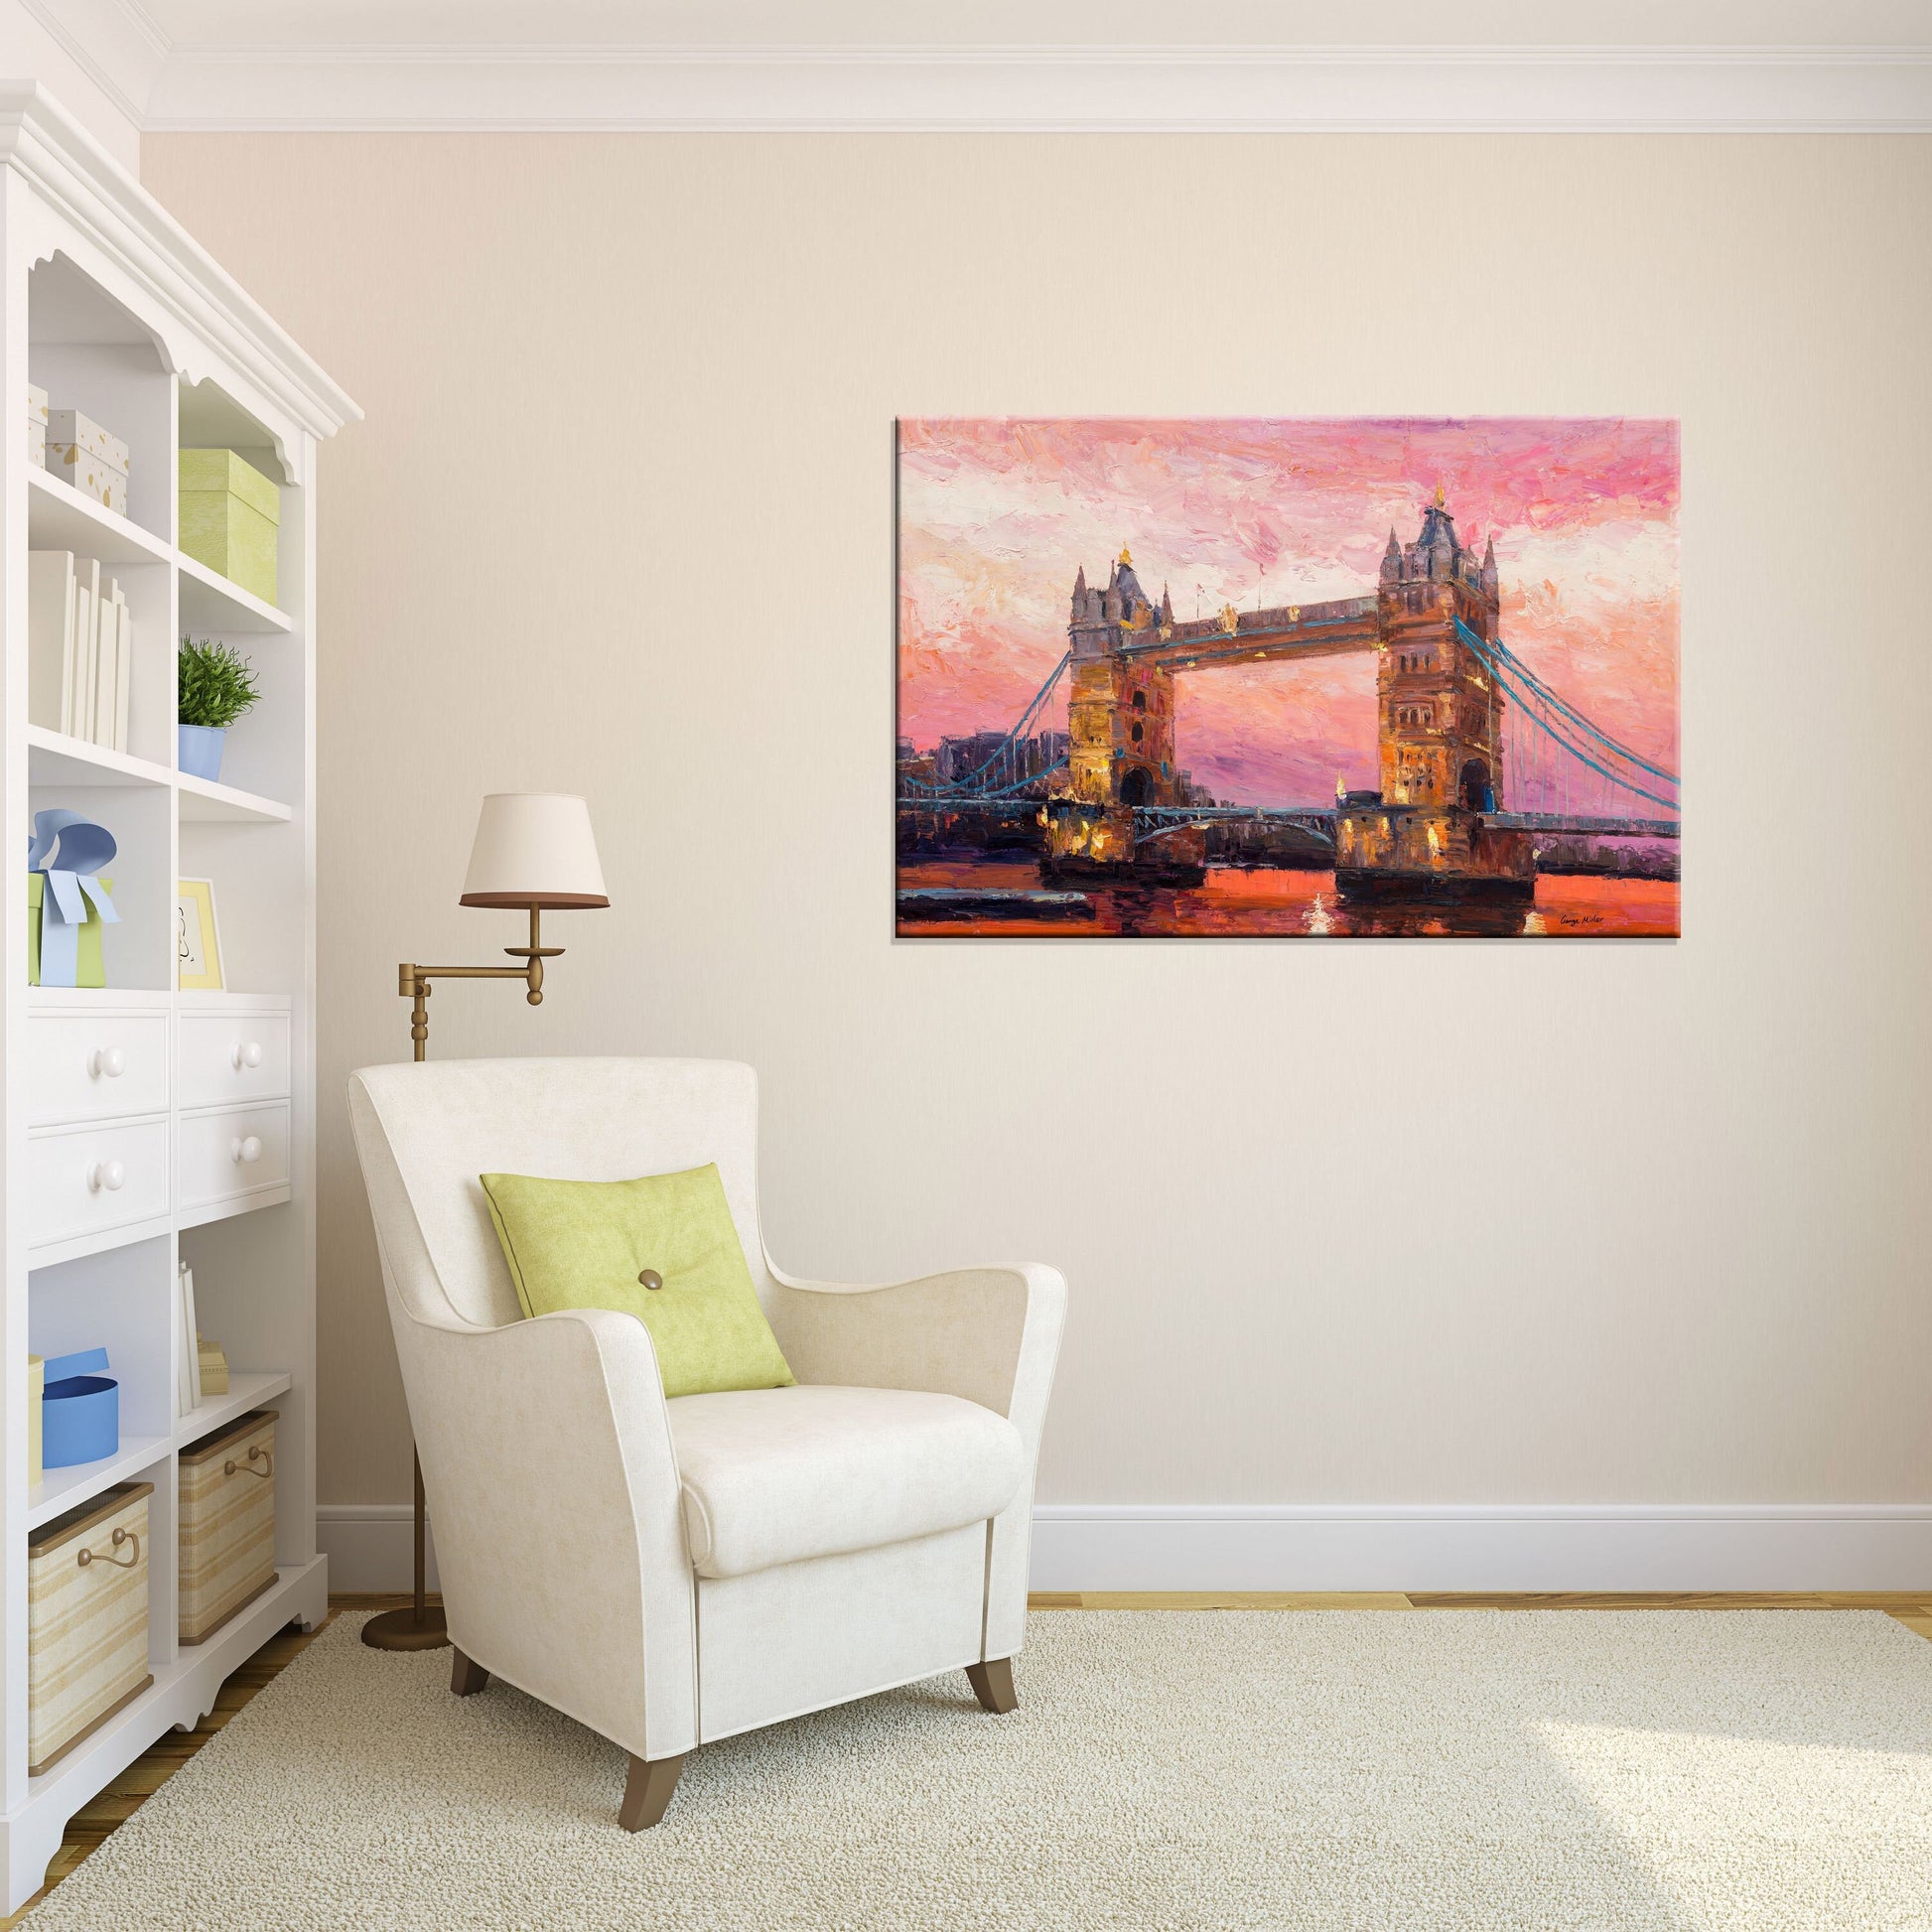 Tower Bridge, River Thames London, Original Oil Painting, Oil Painting Abstract, Landscape Oil Painting, Large Art, Abstract Wall Art